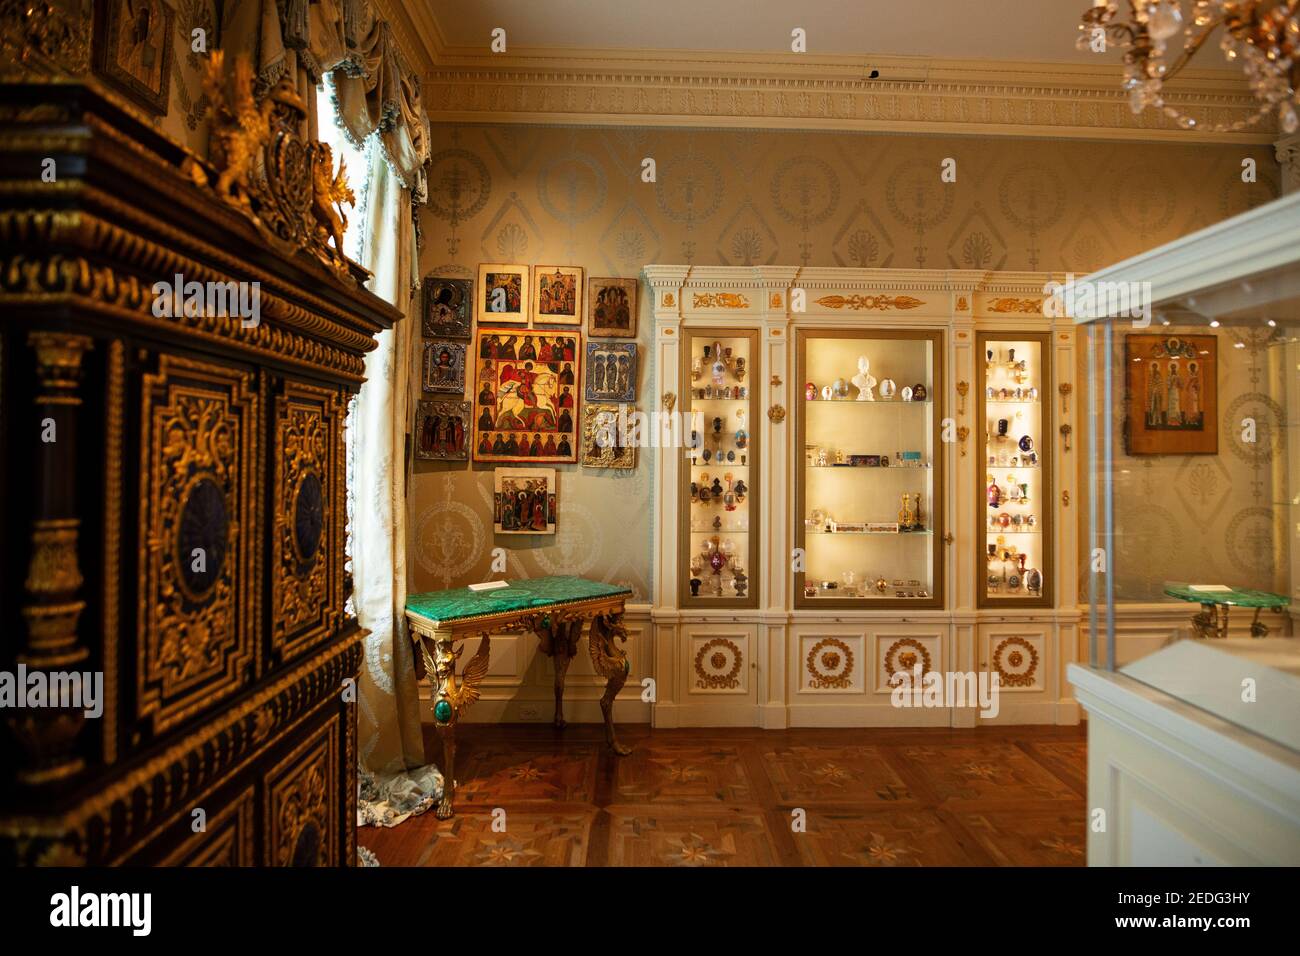 The Icon Room at Hillwood, the estate of Marjorie Merriweather Post in Washington, DC, USA. Post displayed Russian icons and Faberge objects here. Stock Photo